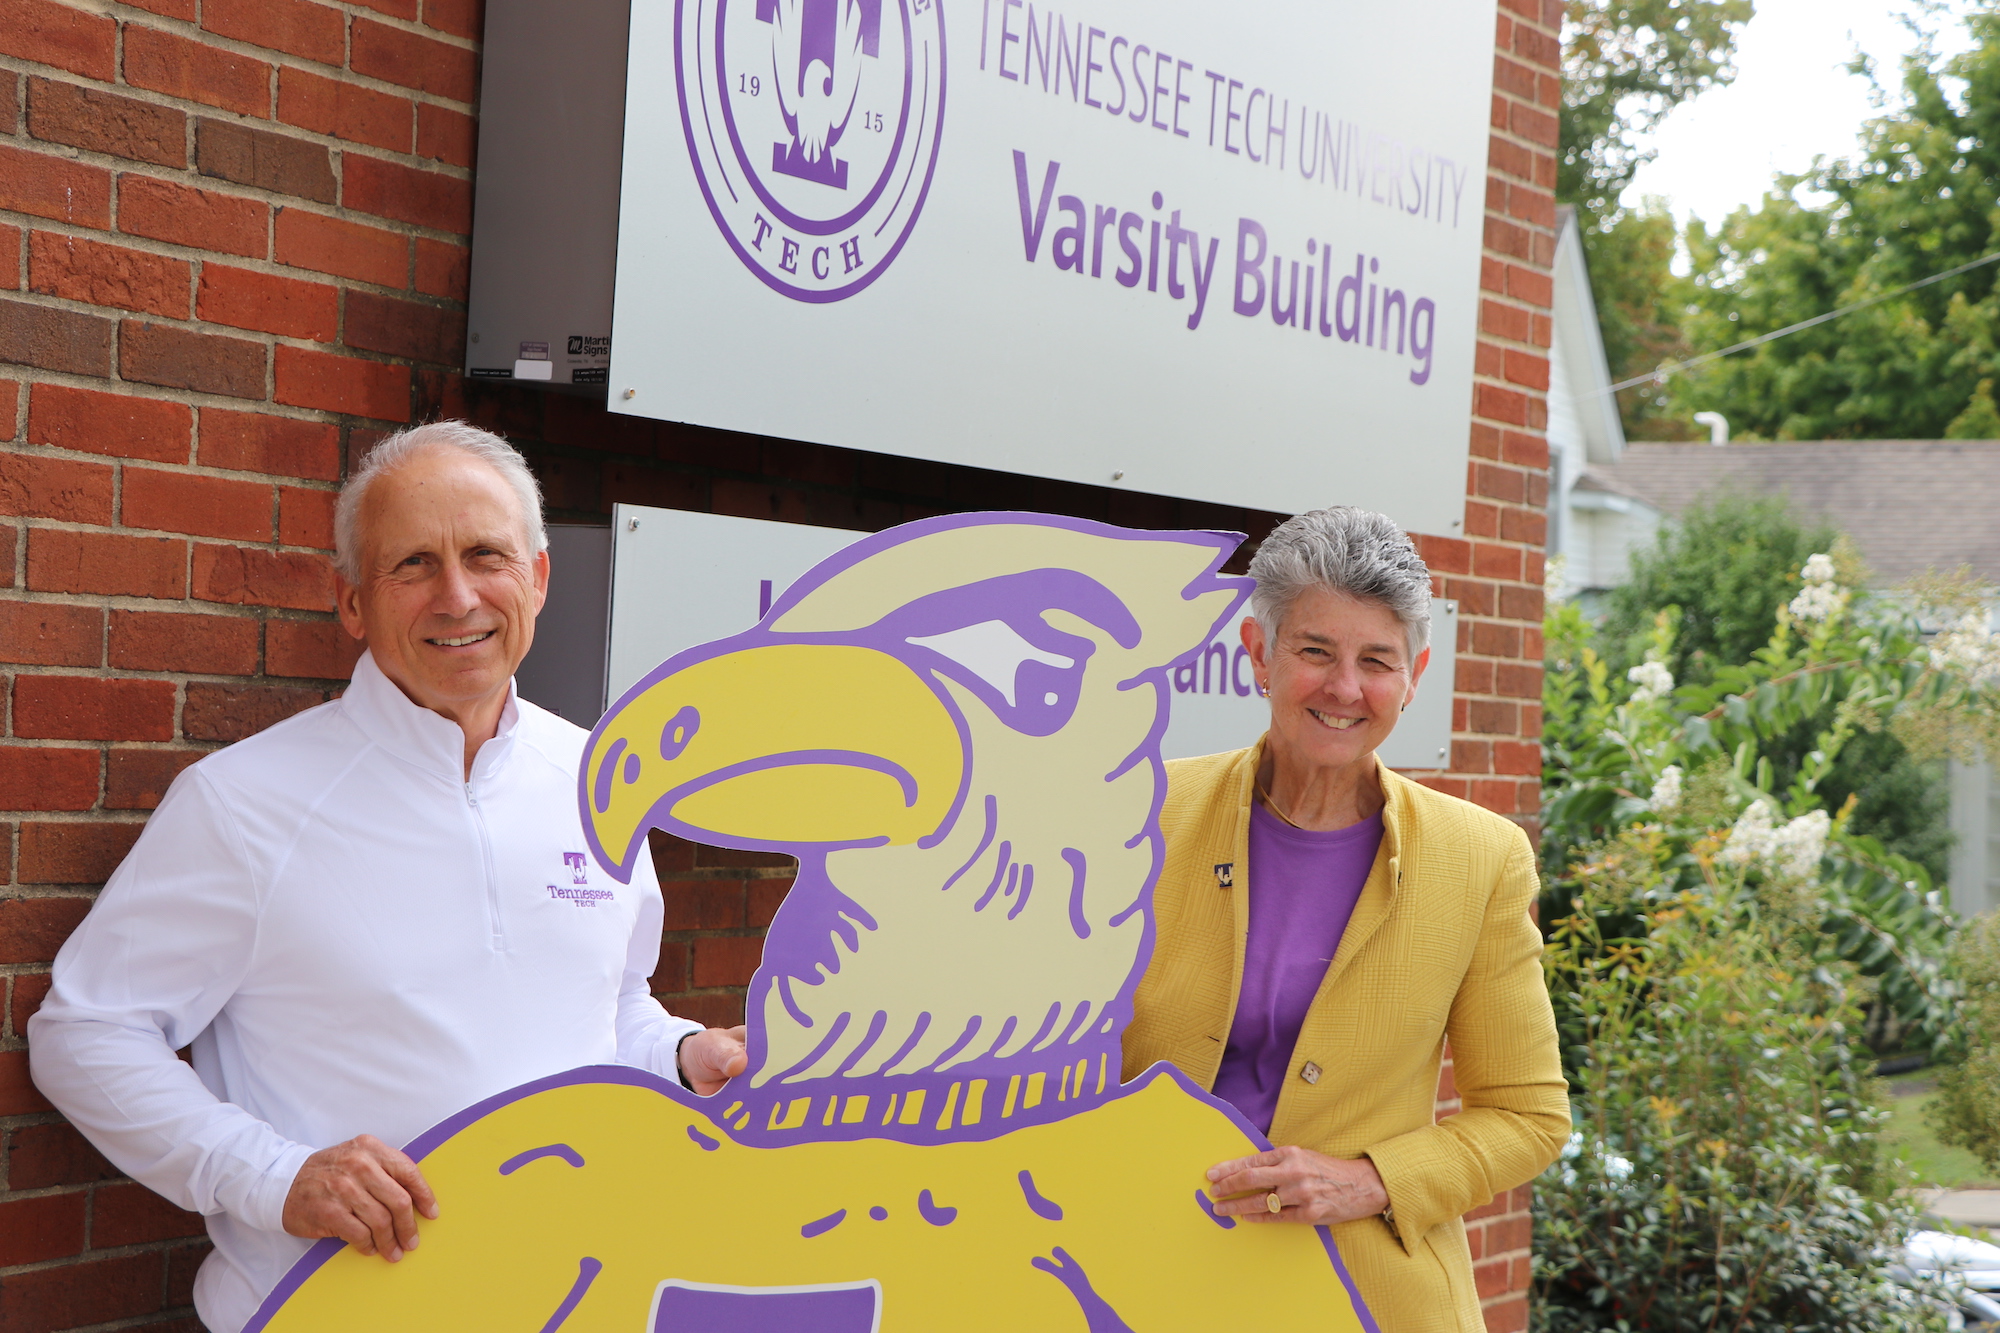 A photo of Ottis Phillips and Dianne Murphy smiling behind a large cutout of Tommy Tech. They are standing in front of the Varsity Building.